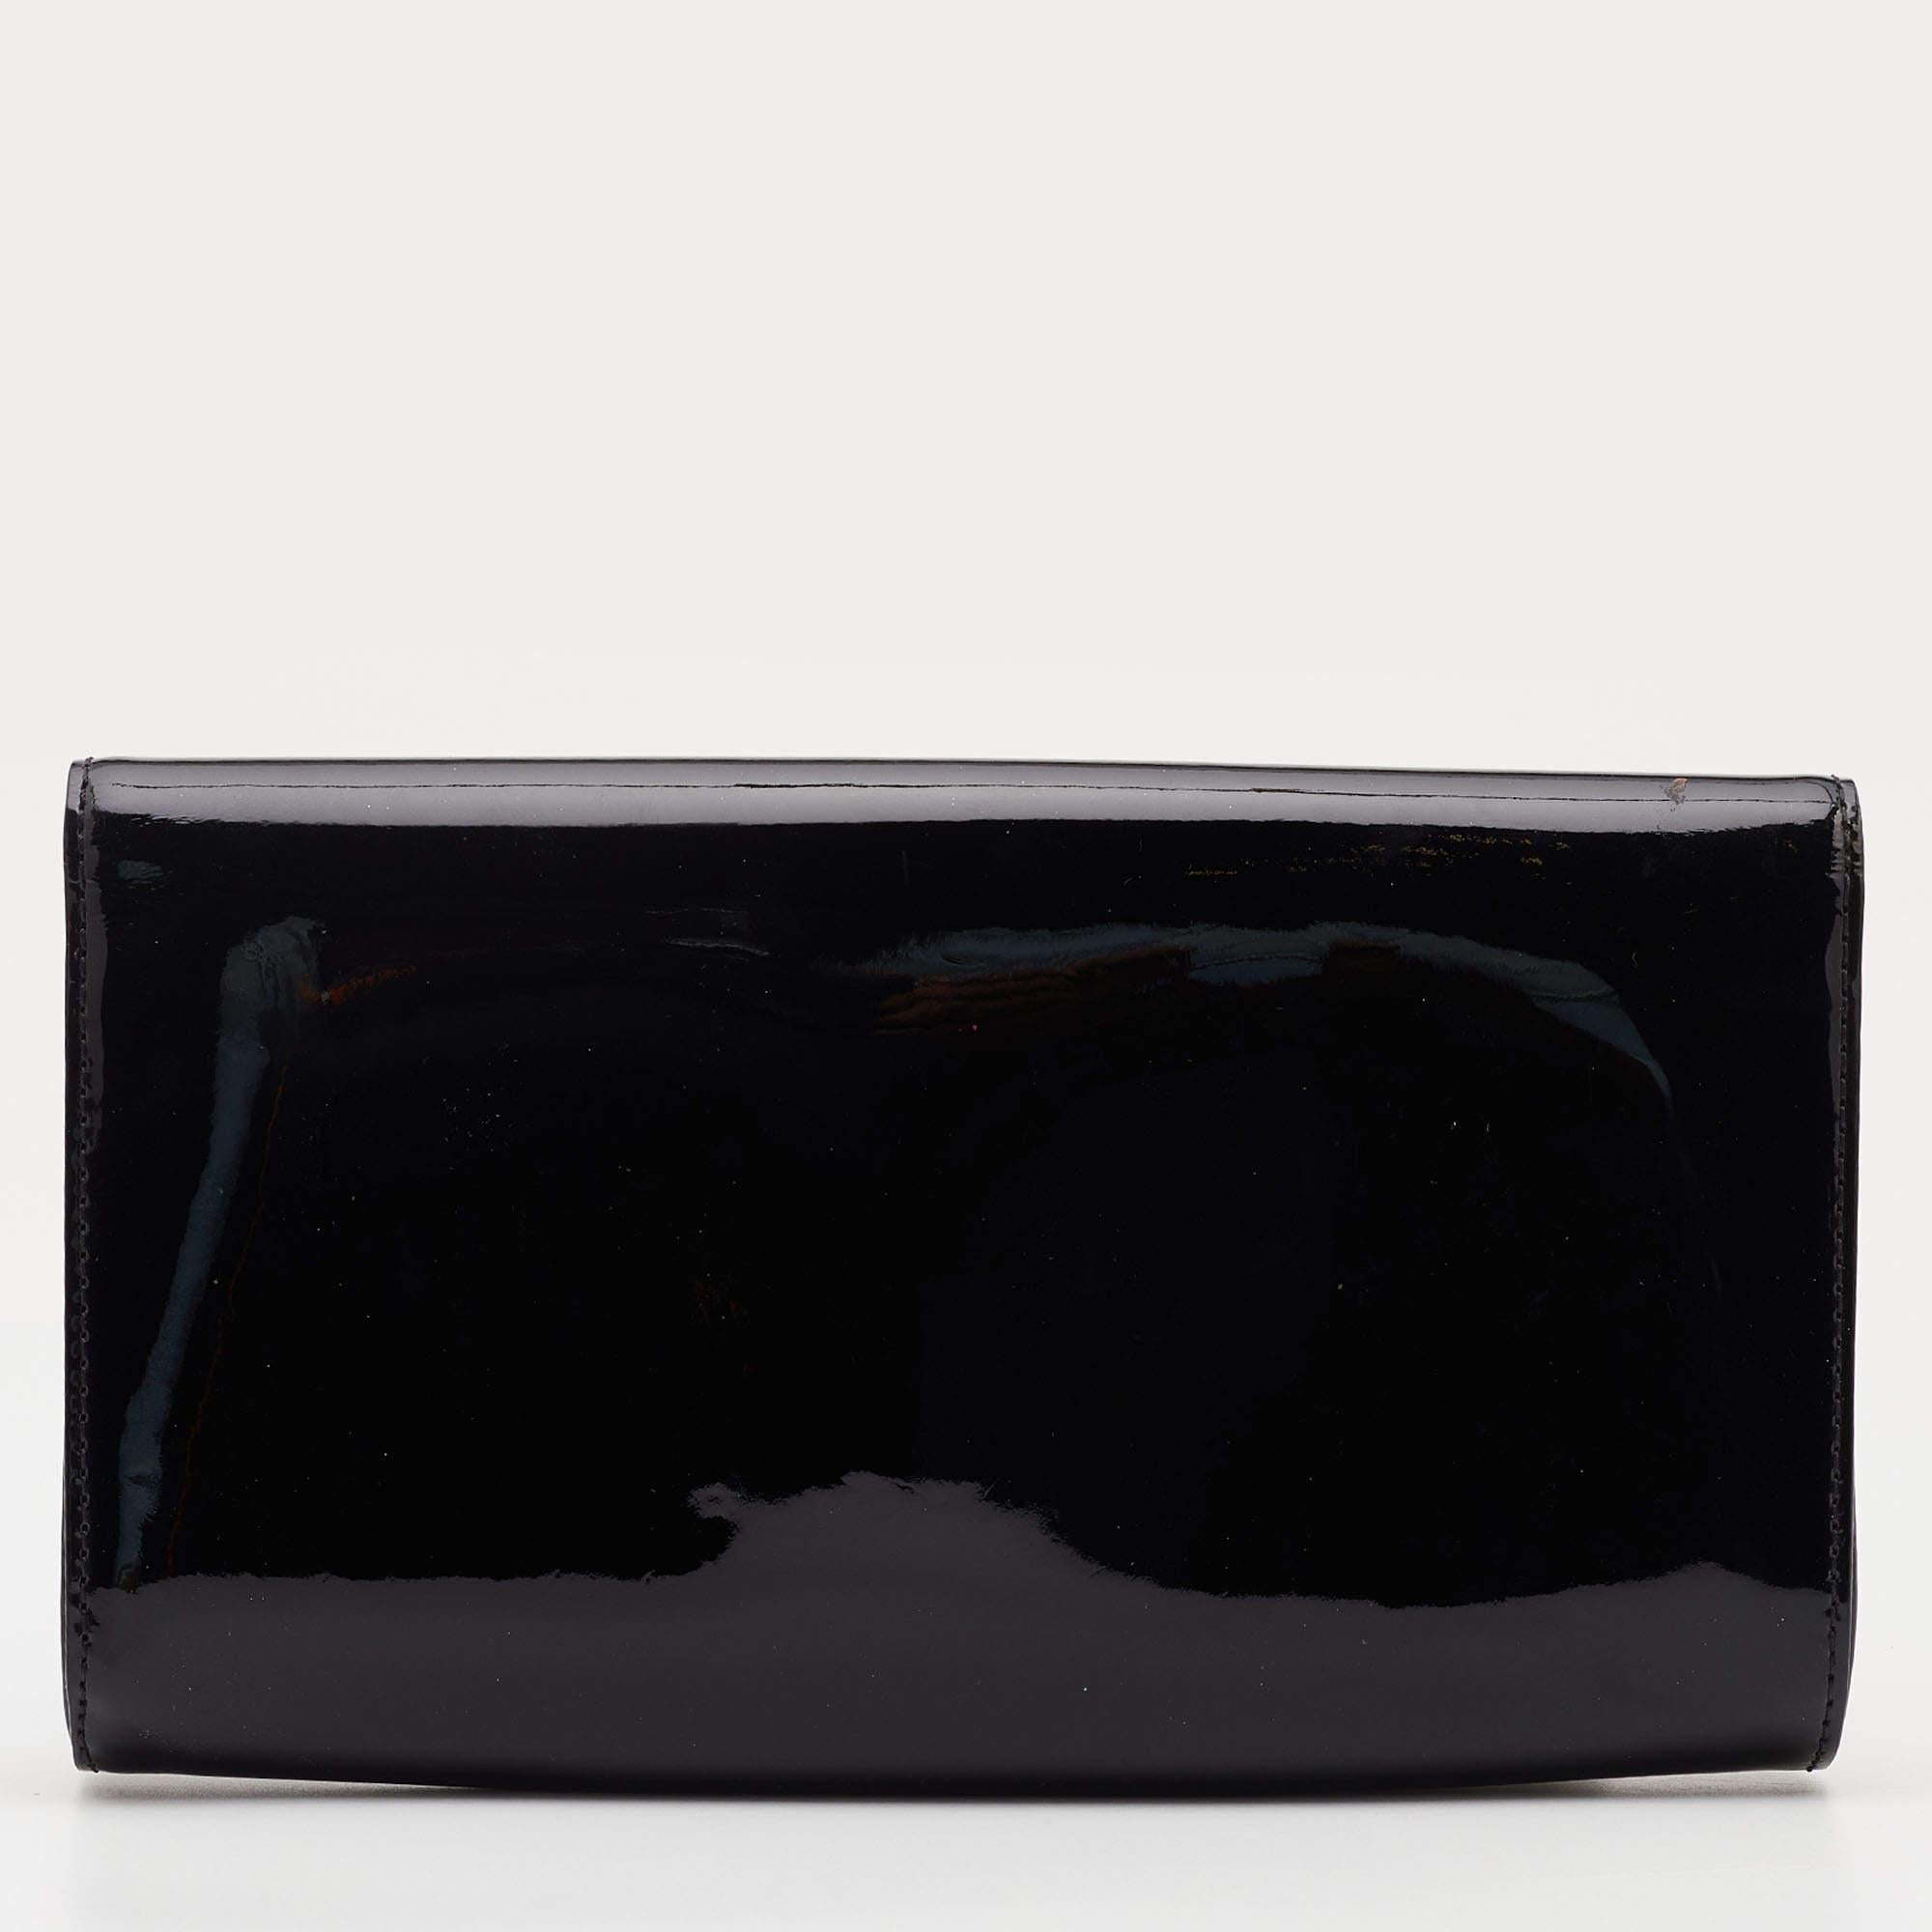 The Louise clutch from Louis Vuitton is as elegant as it can get. Designed in sleek black-hued leather, the clutch is beautiful. The iconic LV logo in gold-tone metal adorns the outer flap and the fabric interior makes it functional.

Includes: